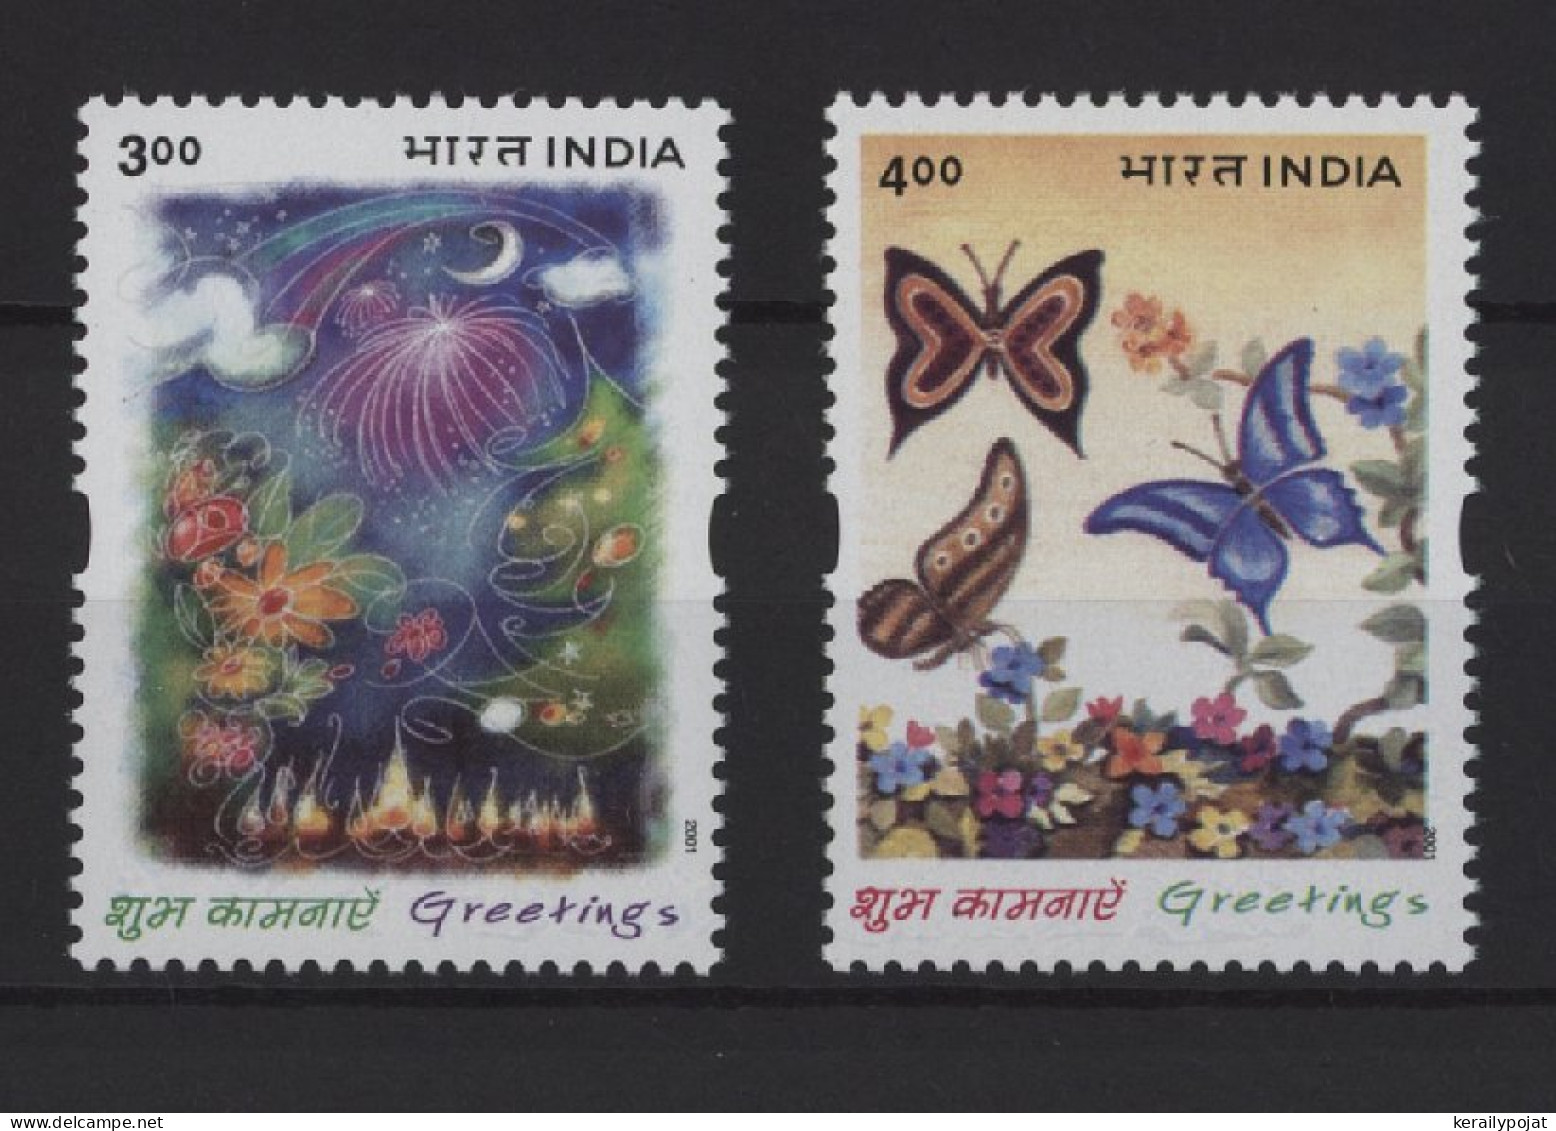 India - 2001 Greeting Stamps MNH__(TH-26891) - Neufs